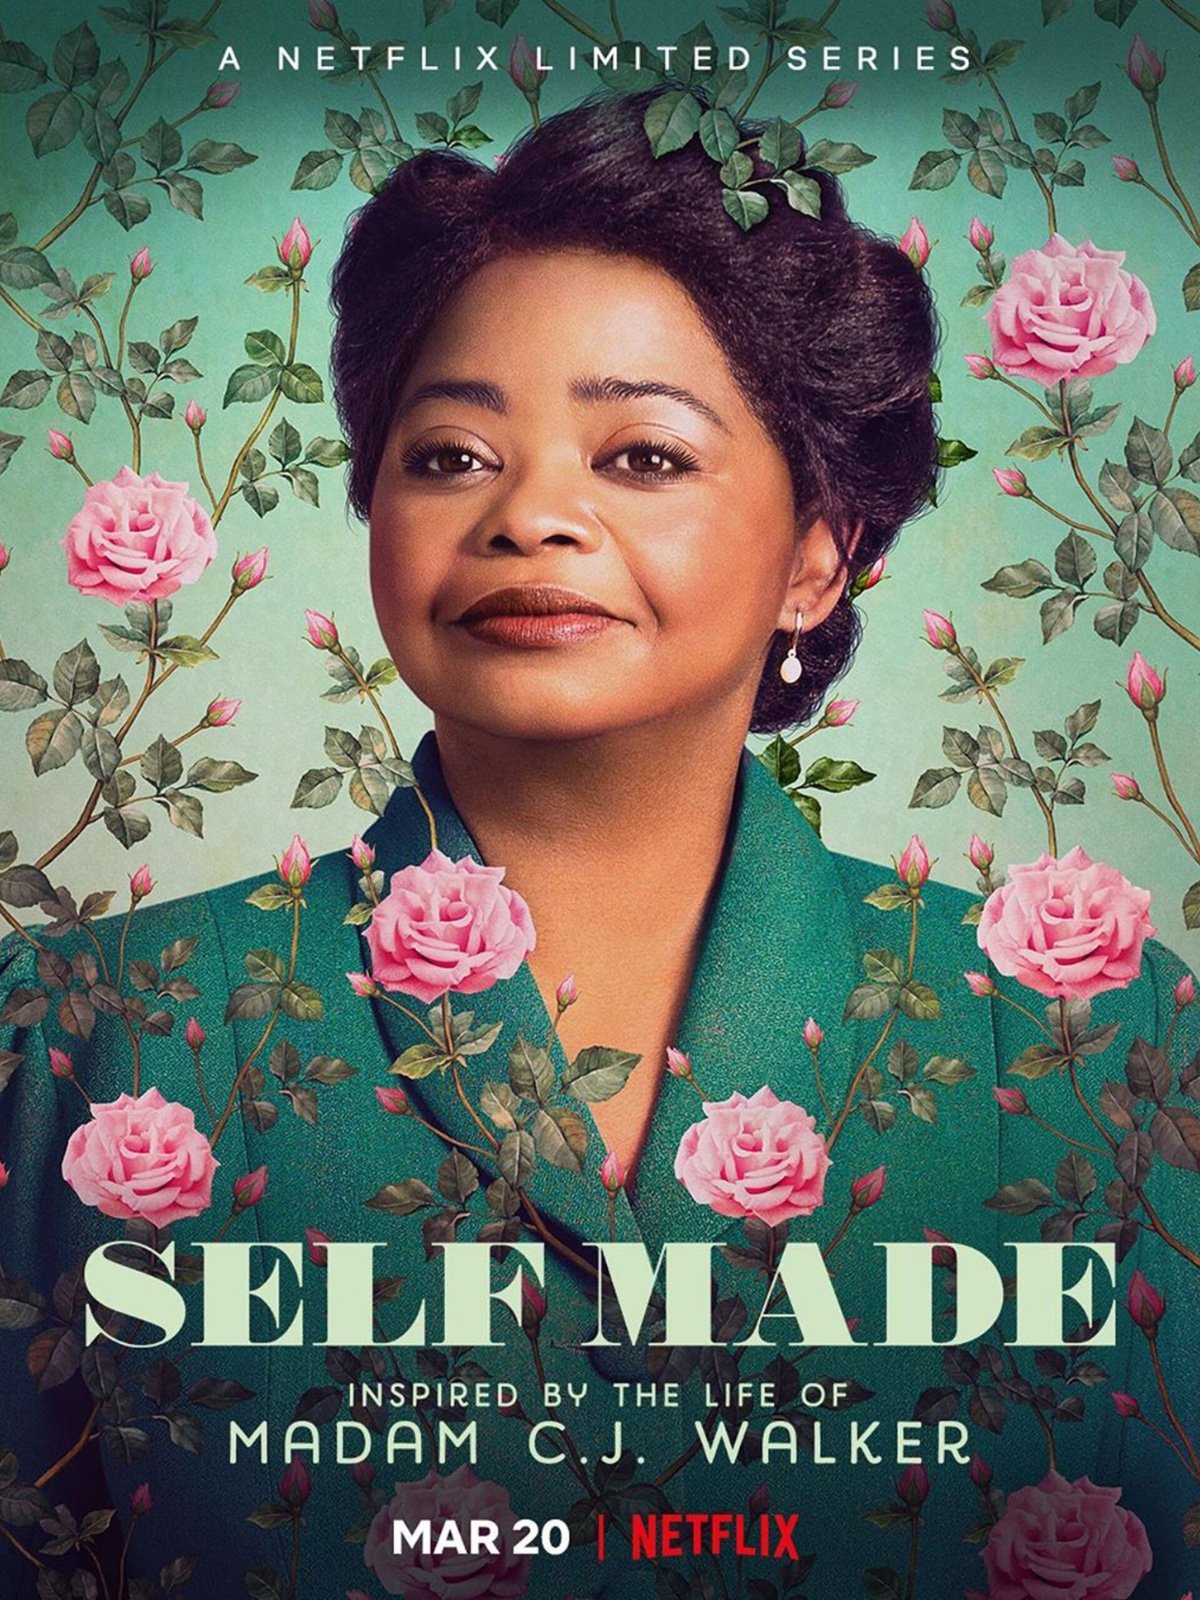 25 - Self Made: Inspired by the Life of Madam C.J. Walker